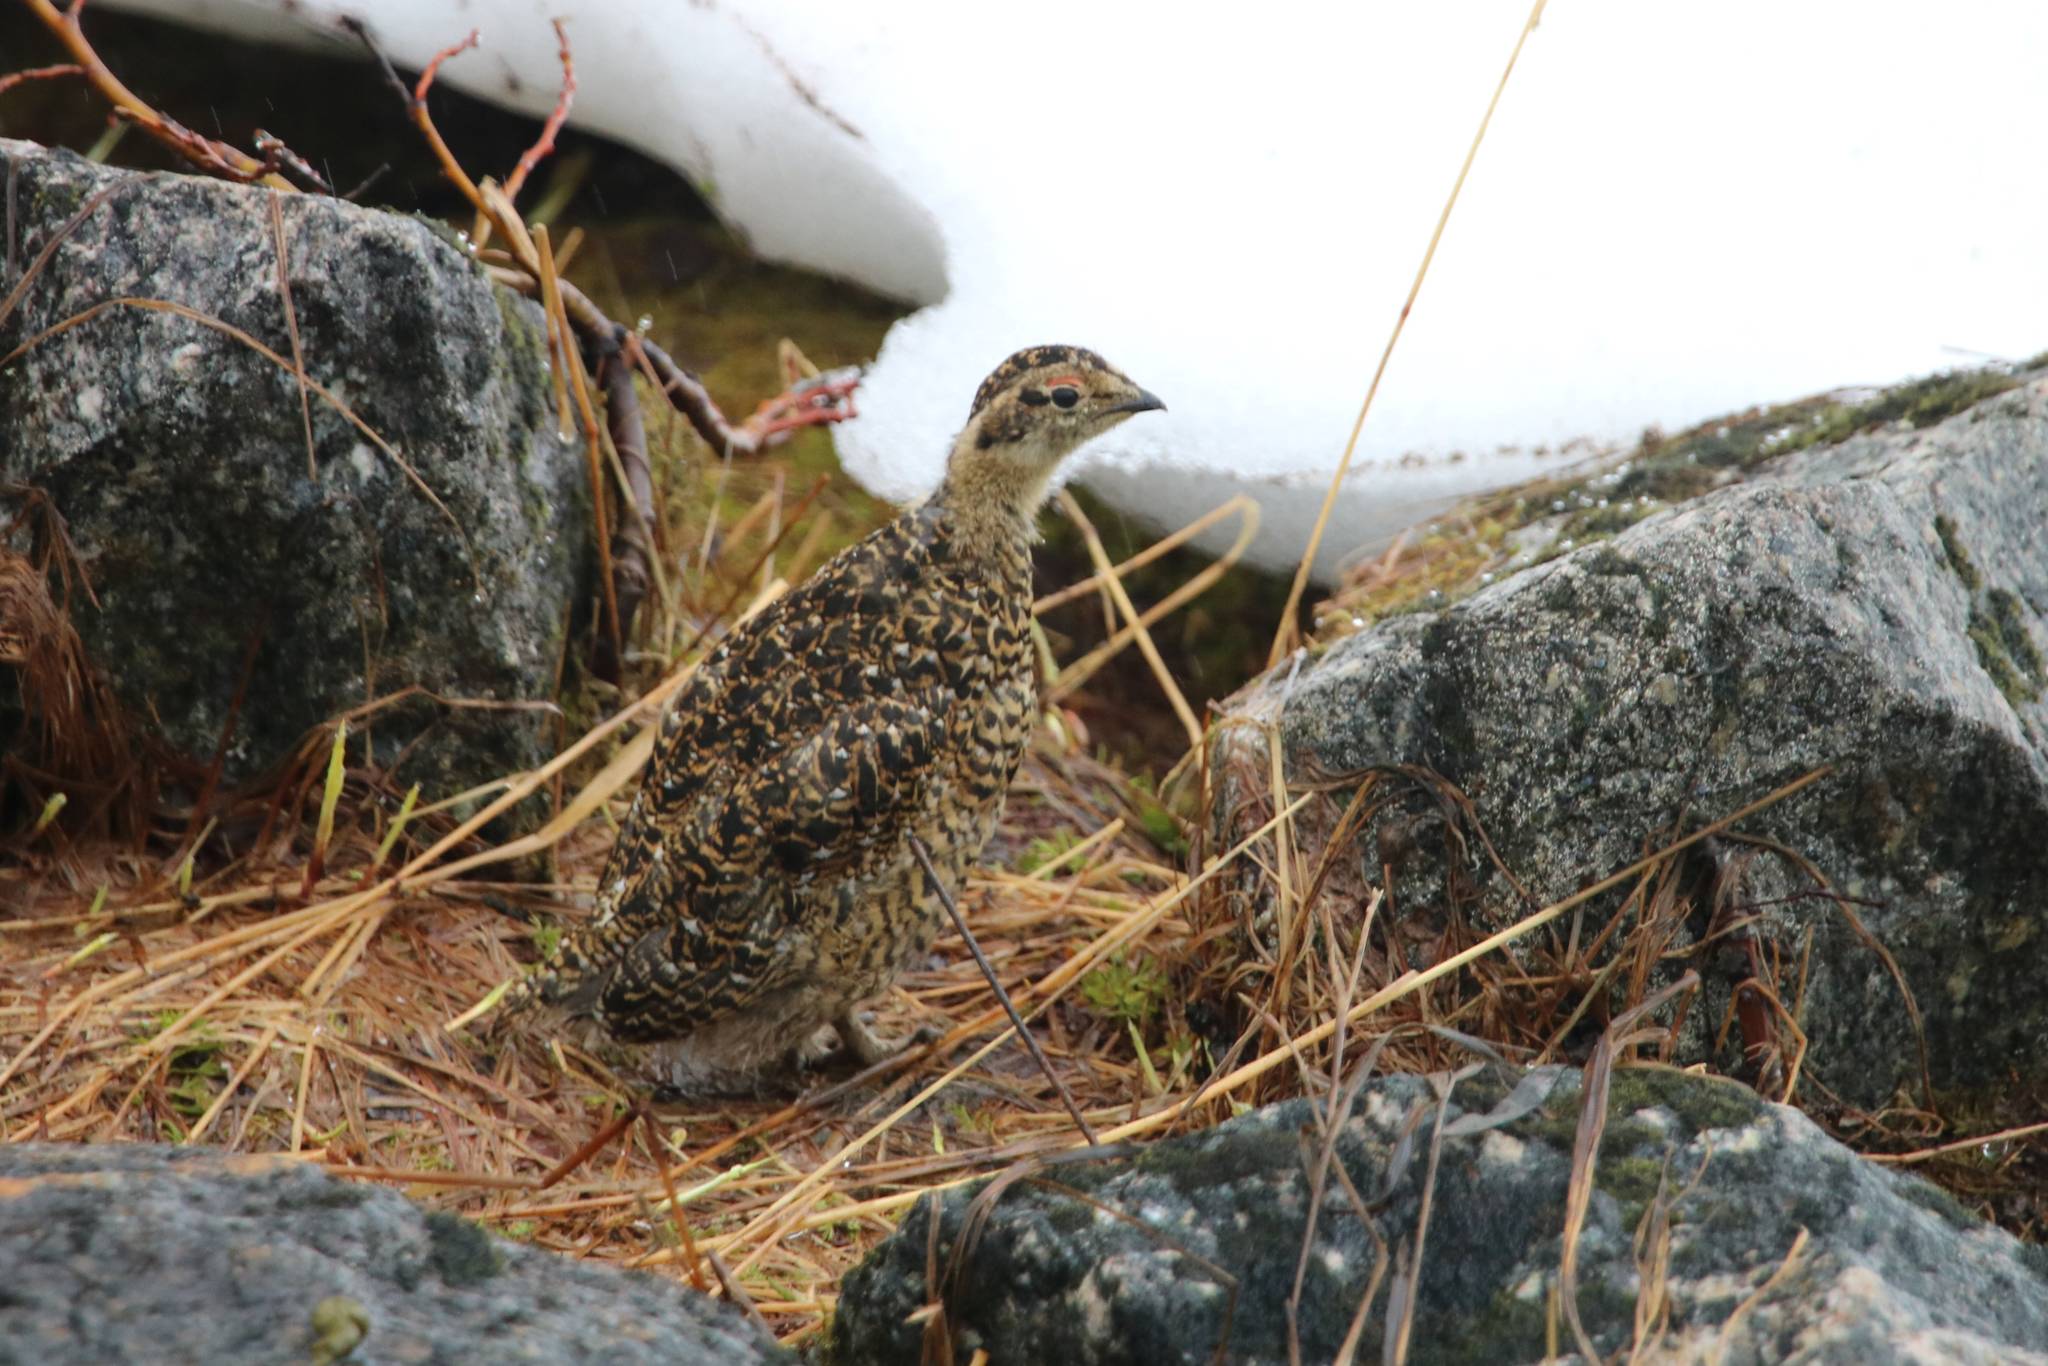 This photo shows a watchful young ptarmigan in Granite Basin. (Courtesy Photo / David Bergeson)